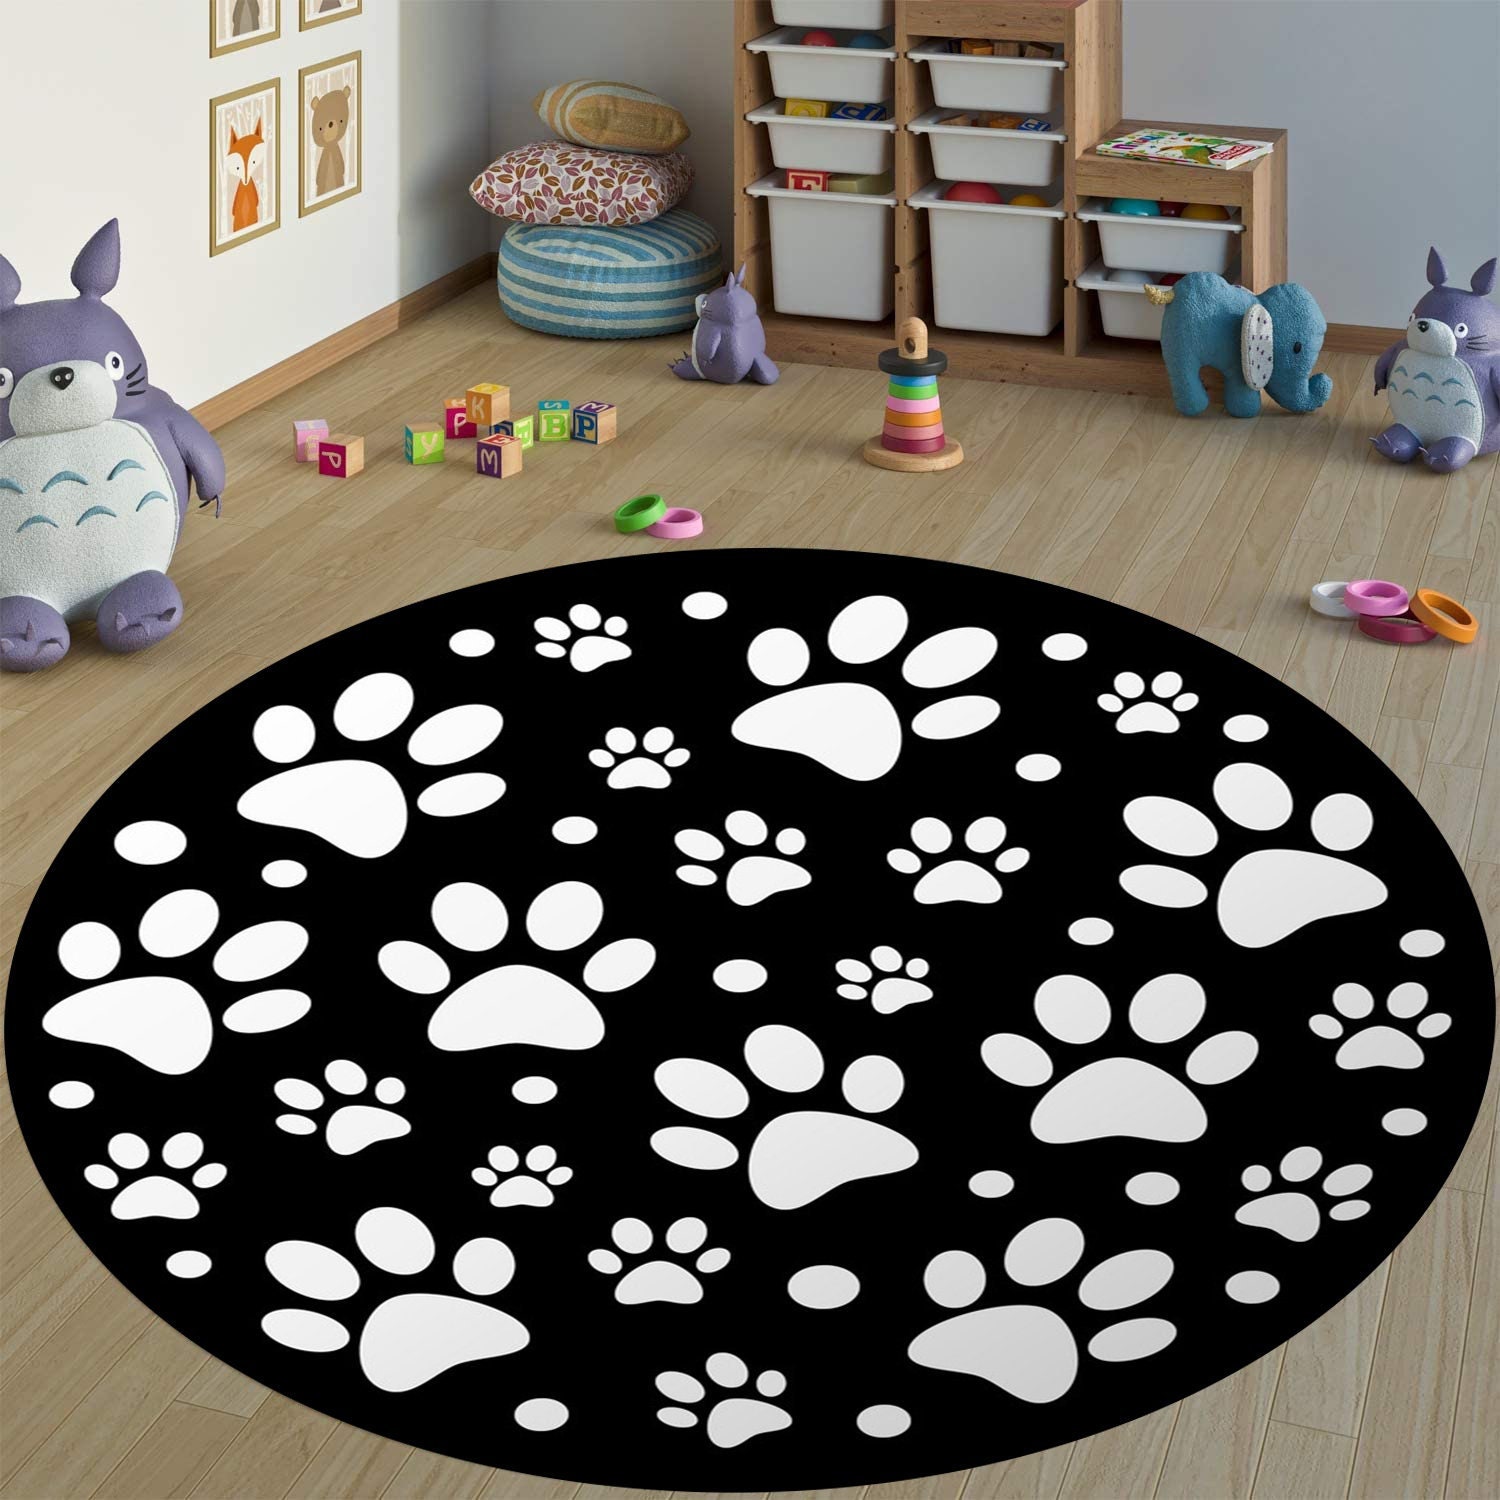 Dog Paw Print Area Rug 4x5 ft for Bedroom Living Room - Black and White  Carpet for Kids Boys Room Decor, Puppy Paw Print Printed Floor Rugs for  Home